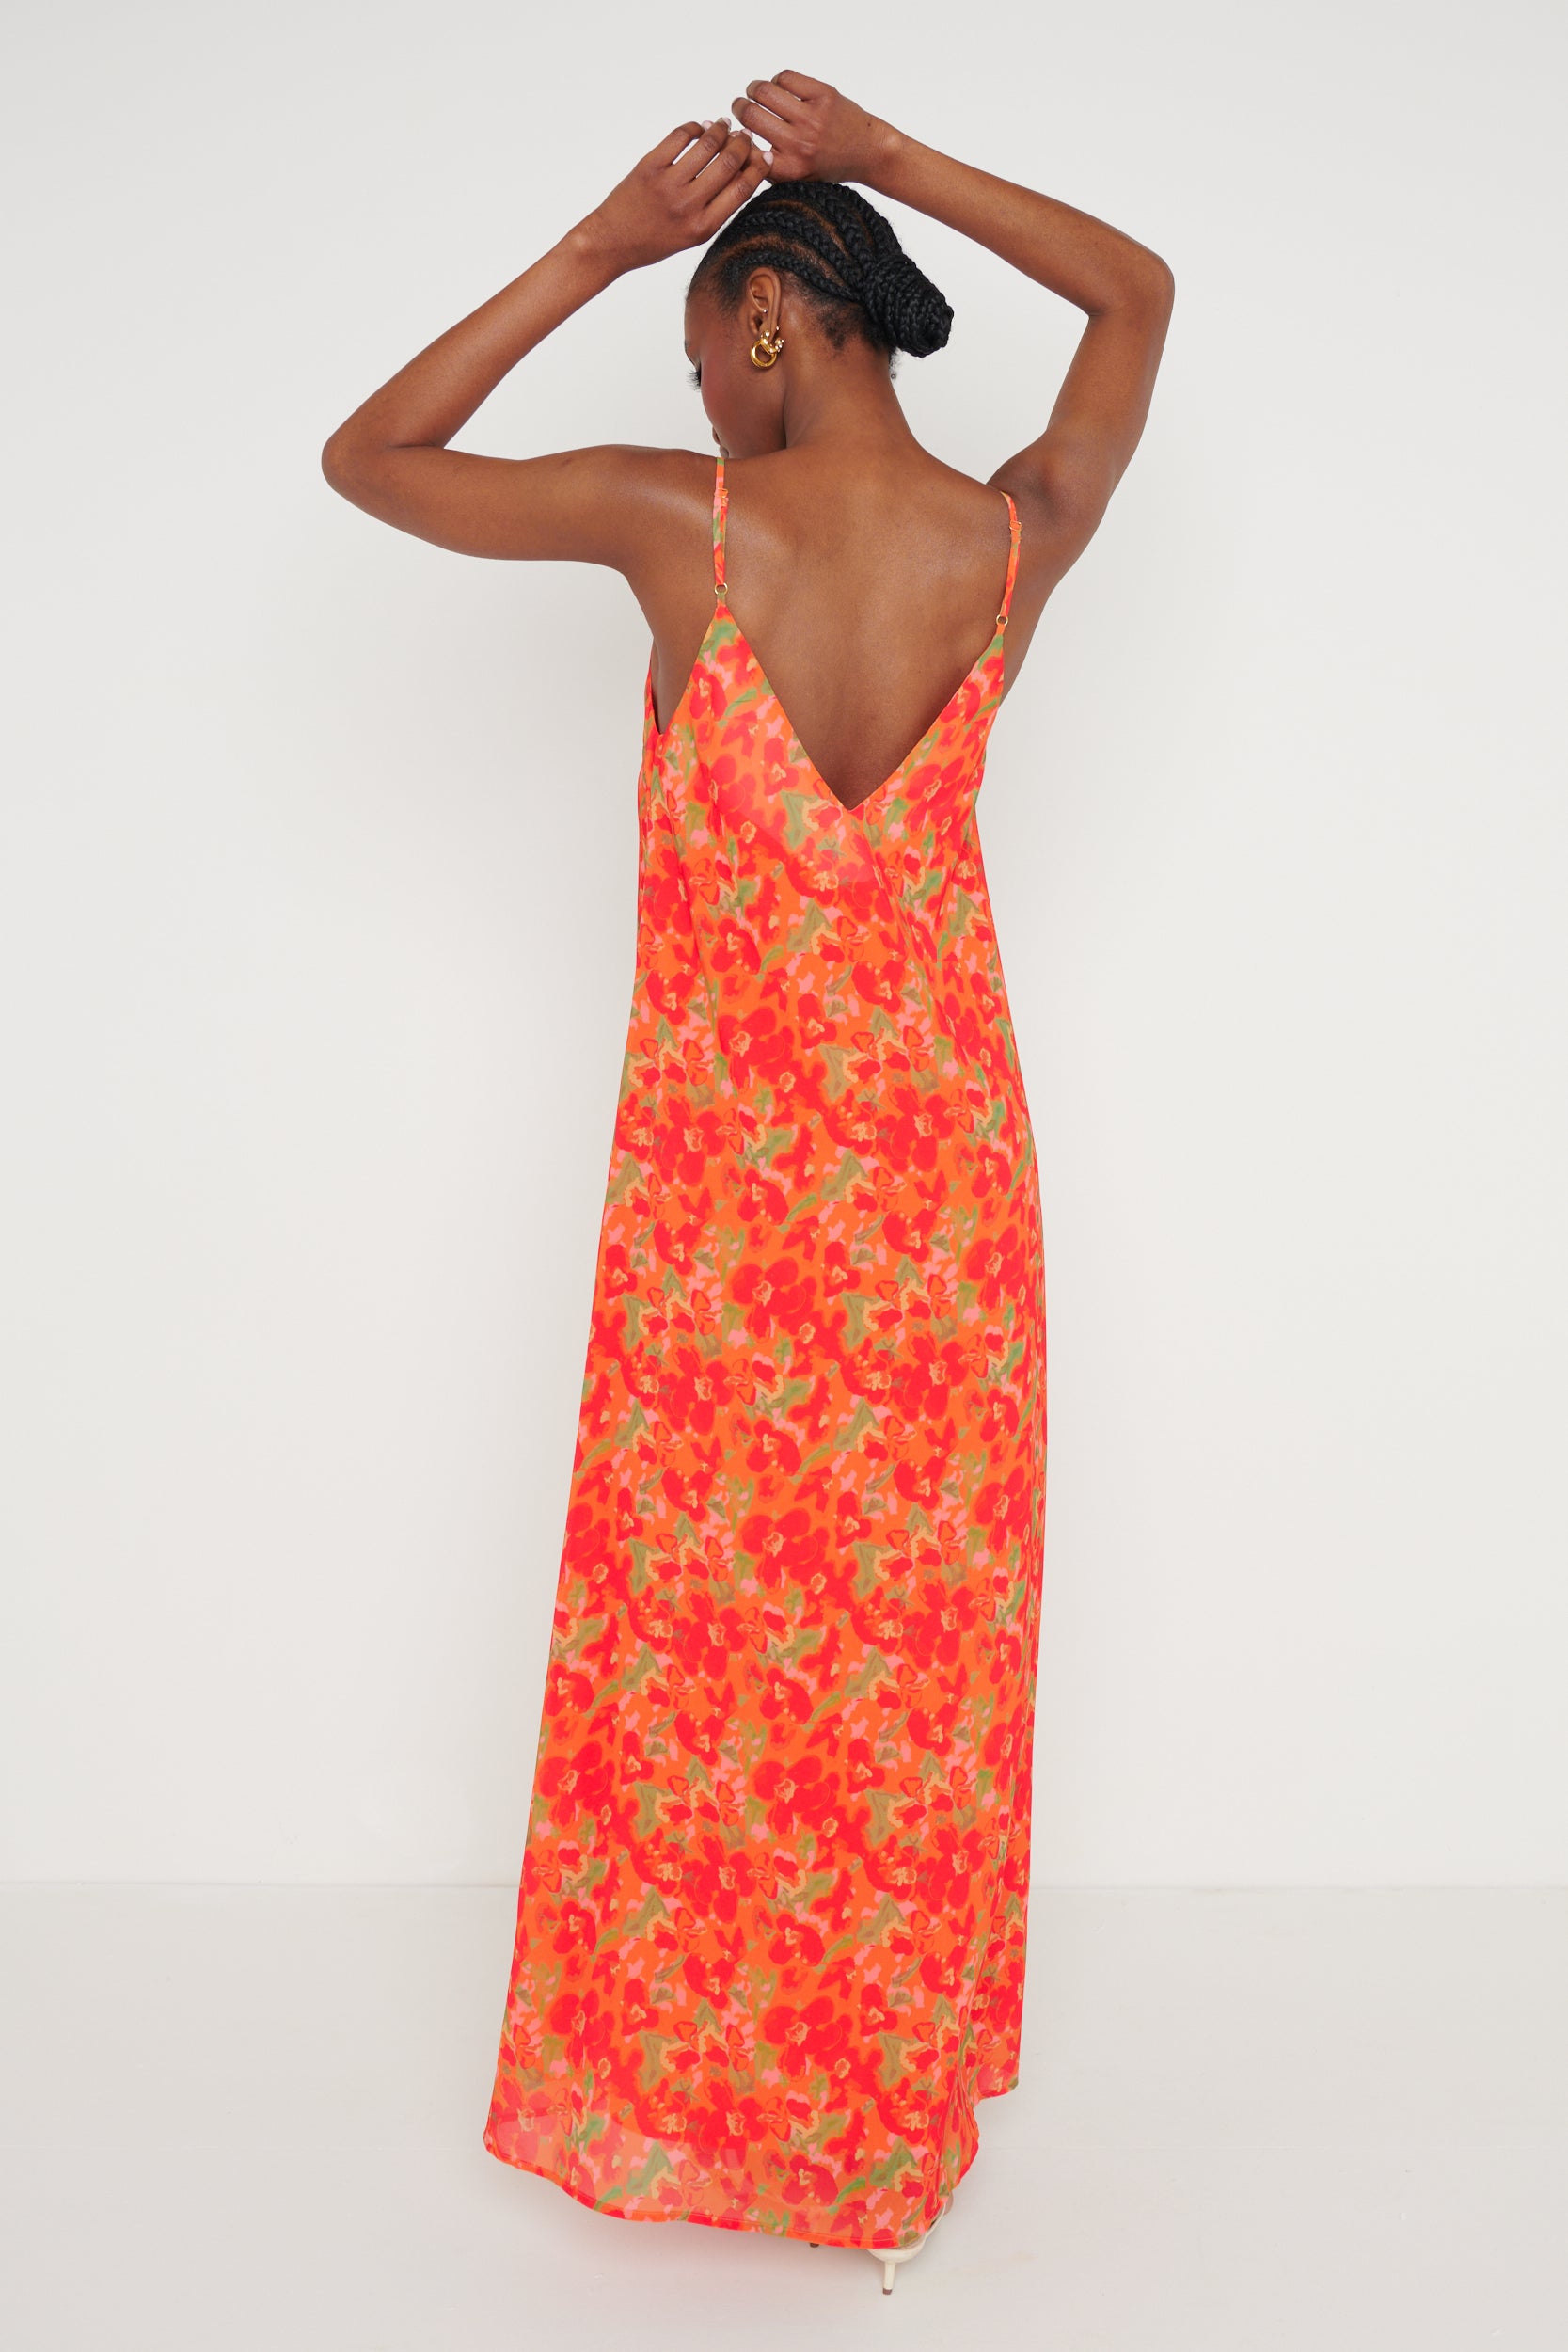 Tiana Trapeze Maxi Dress - Red and Orange Floral